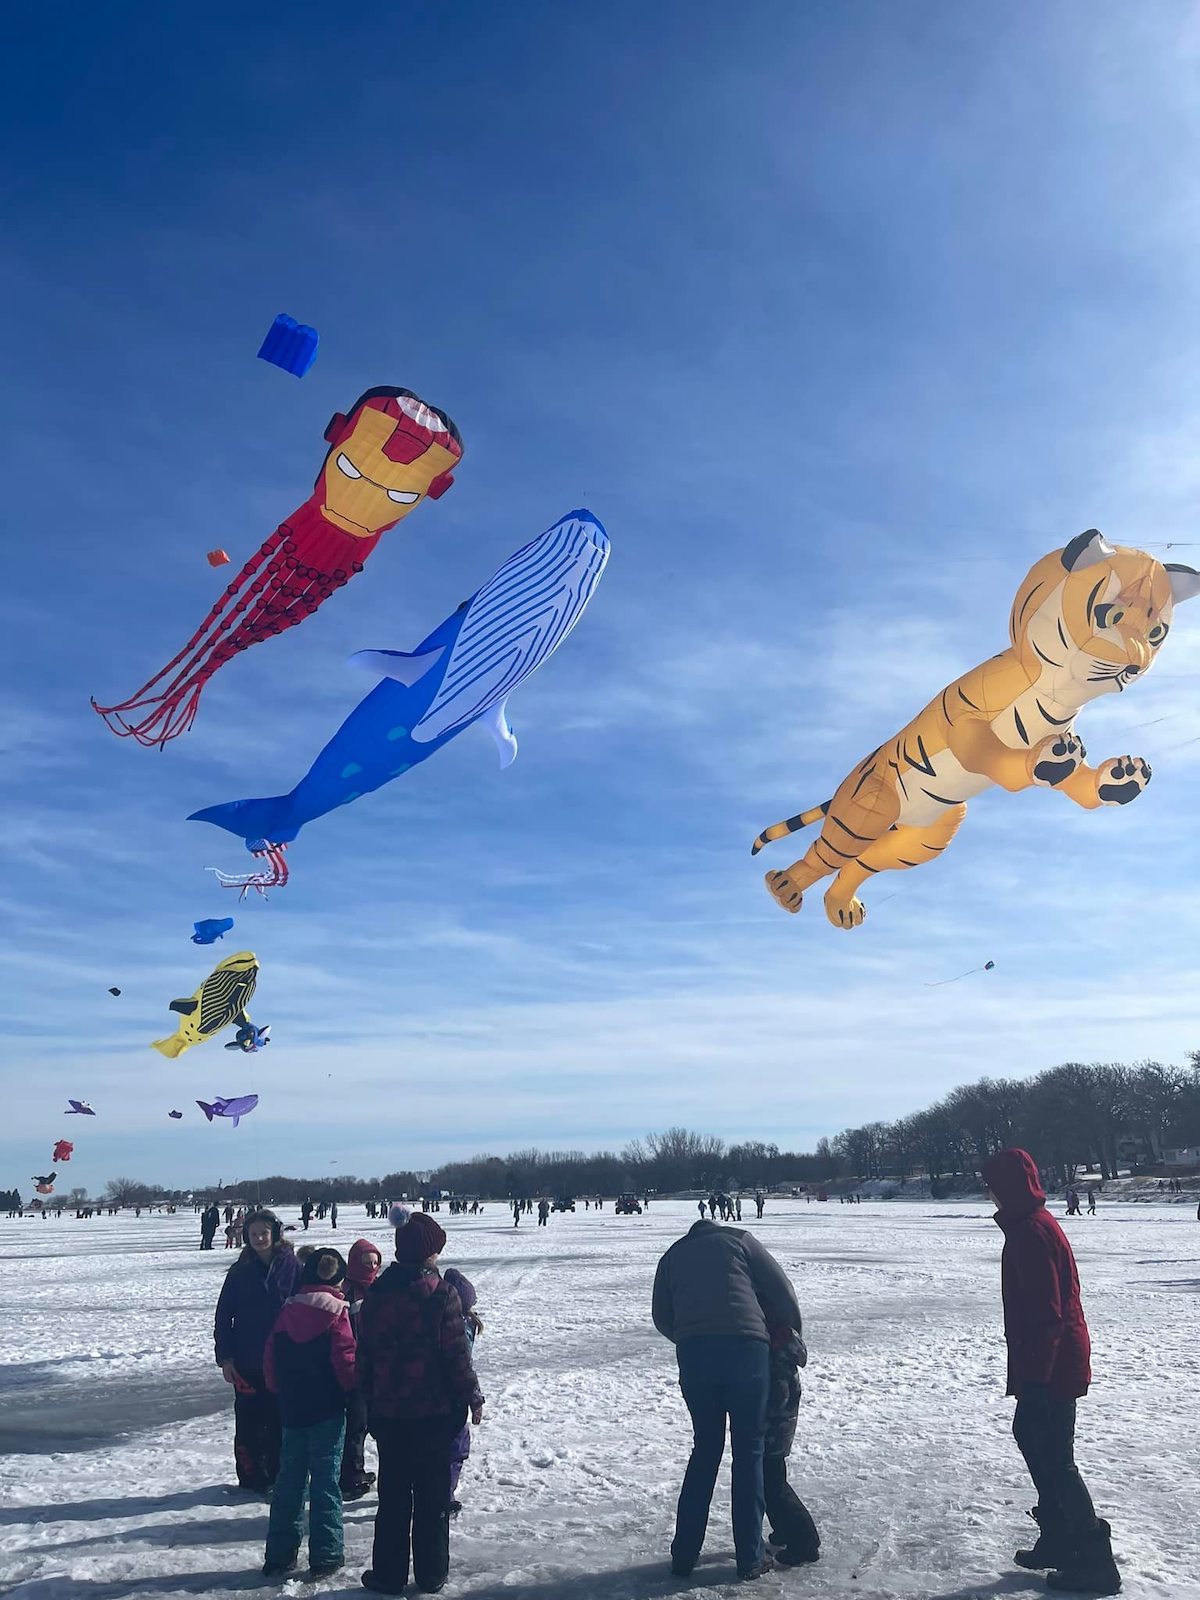 Kite festival on ice at Sleigh and Cutter Festival.